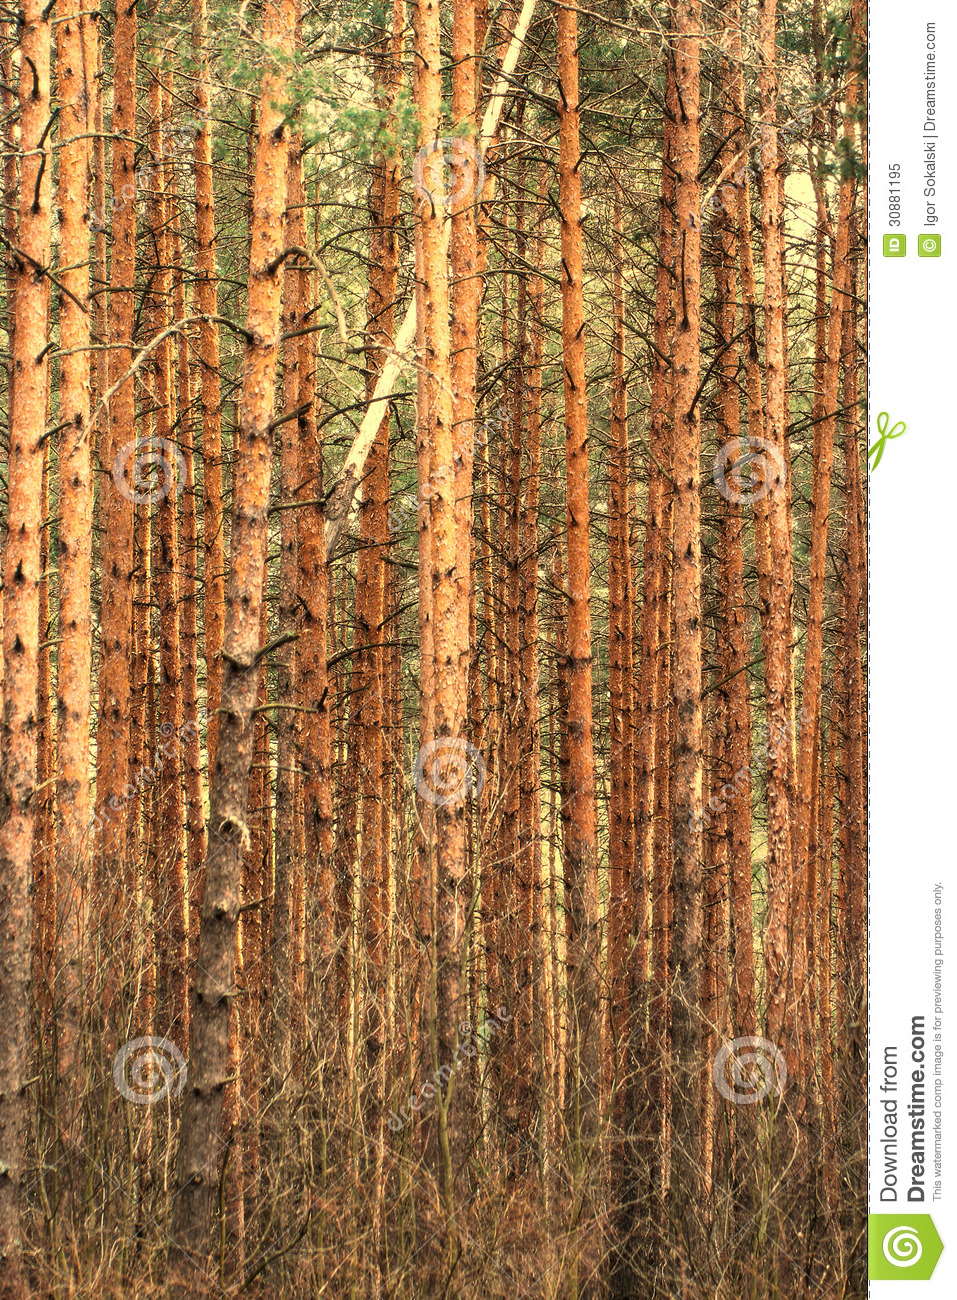  nature forest background vertical pattern consisting of pine trunks